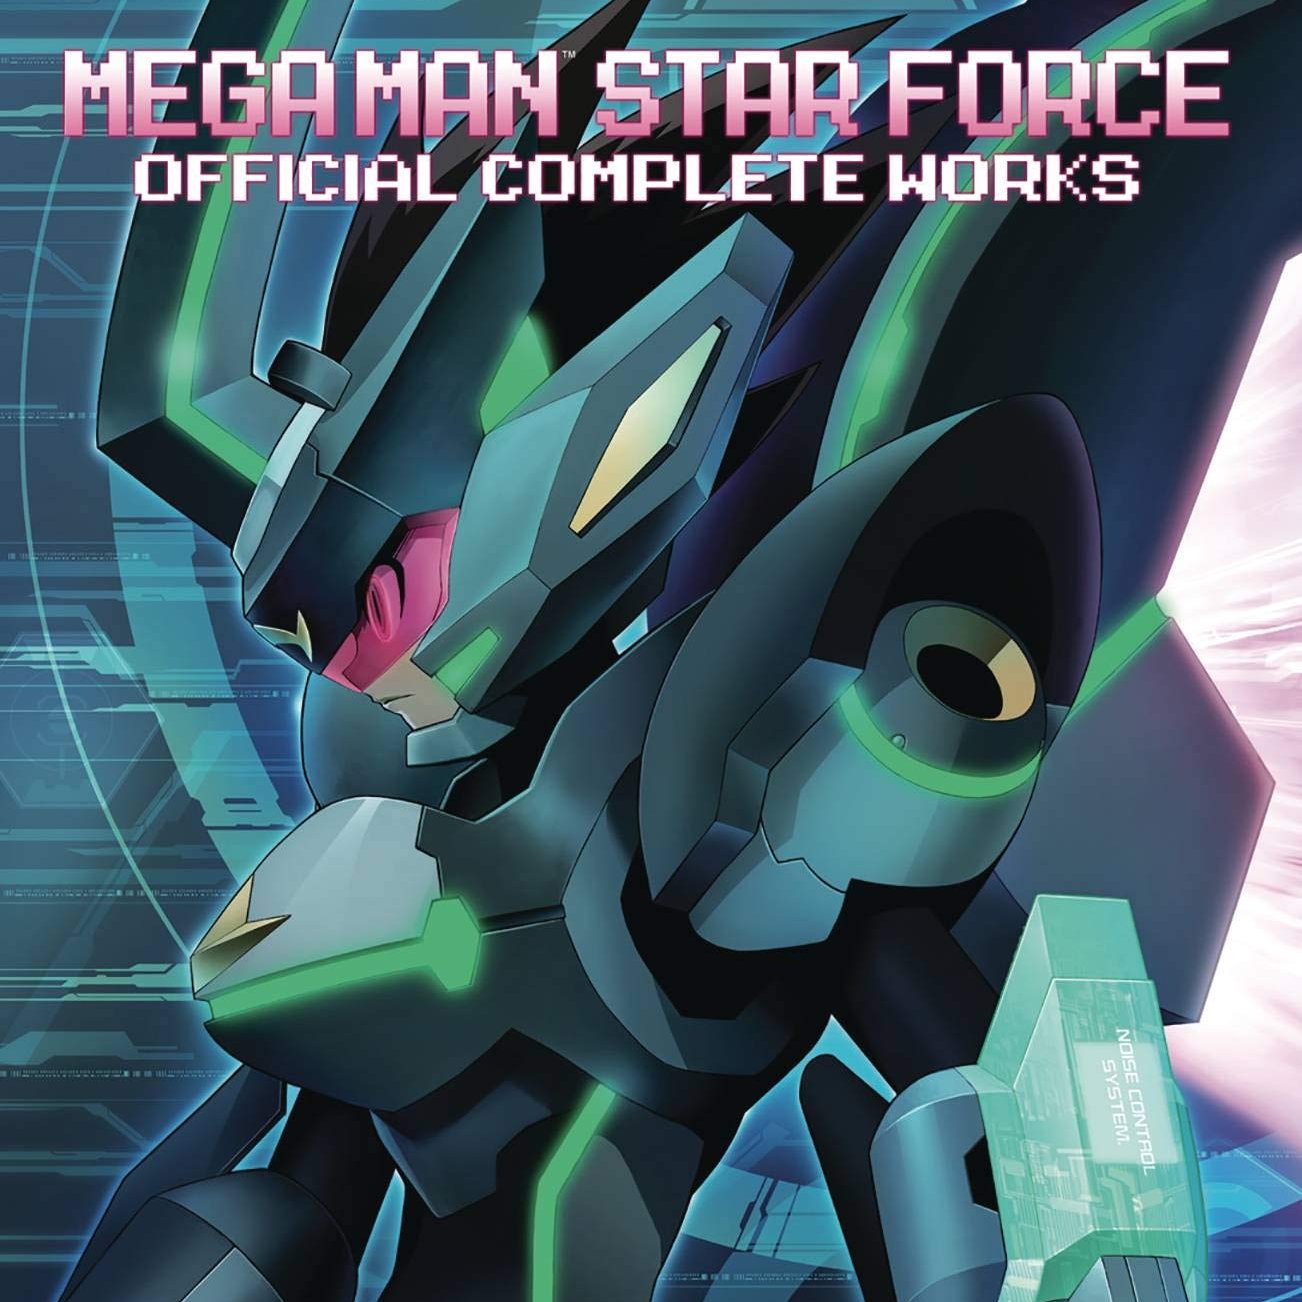 “Also, the hardcover reprint of Mega Man Star Force: Official Complete Work...